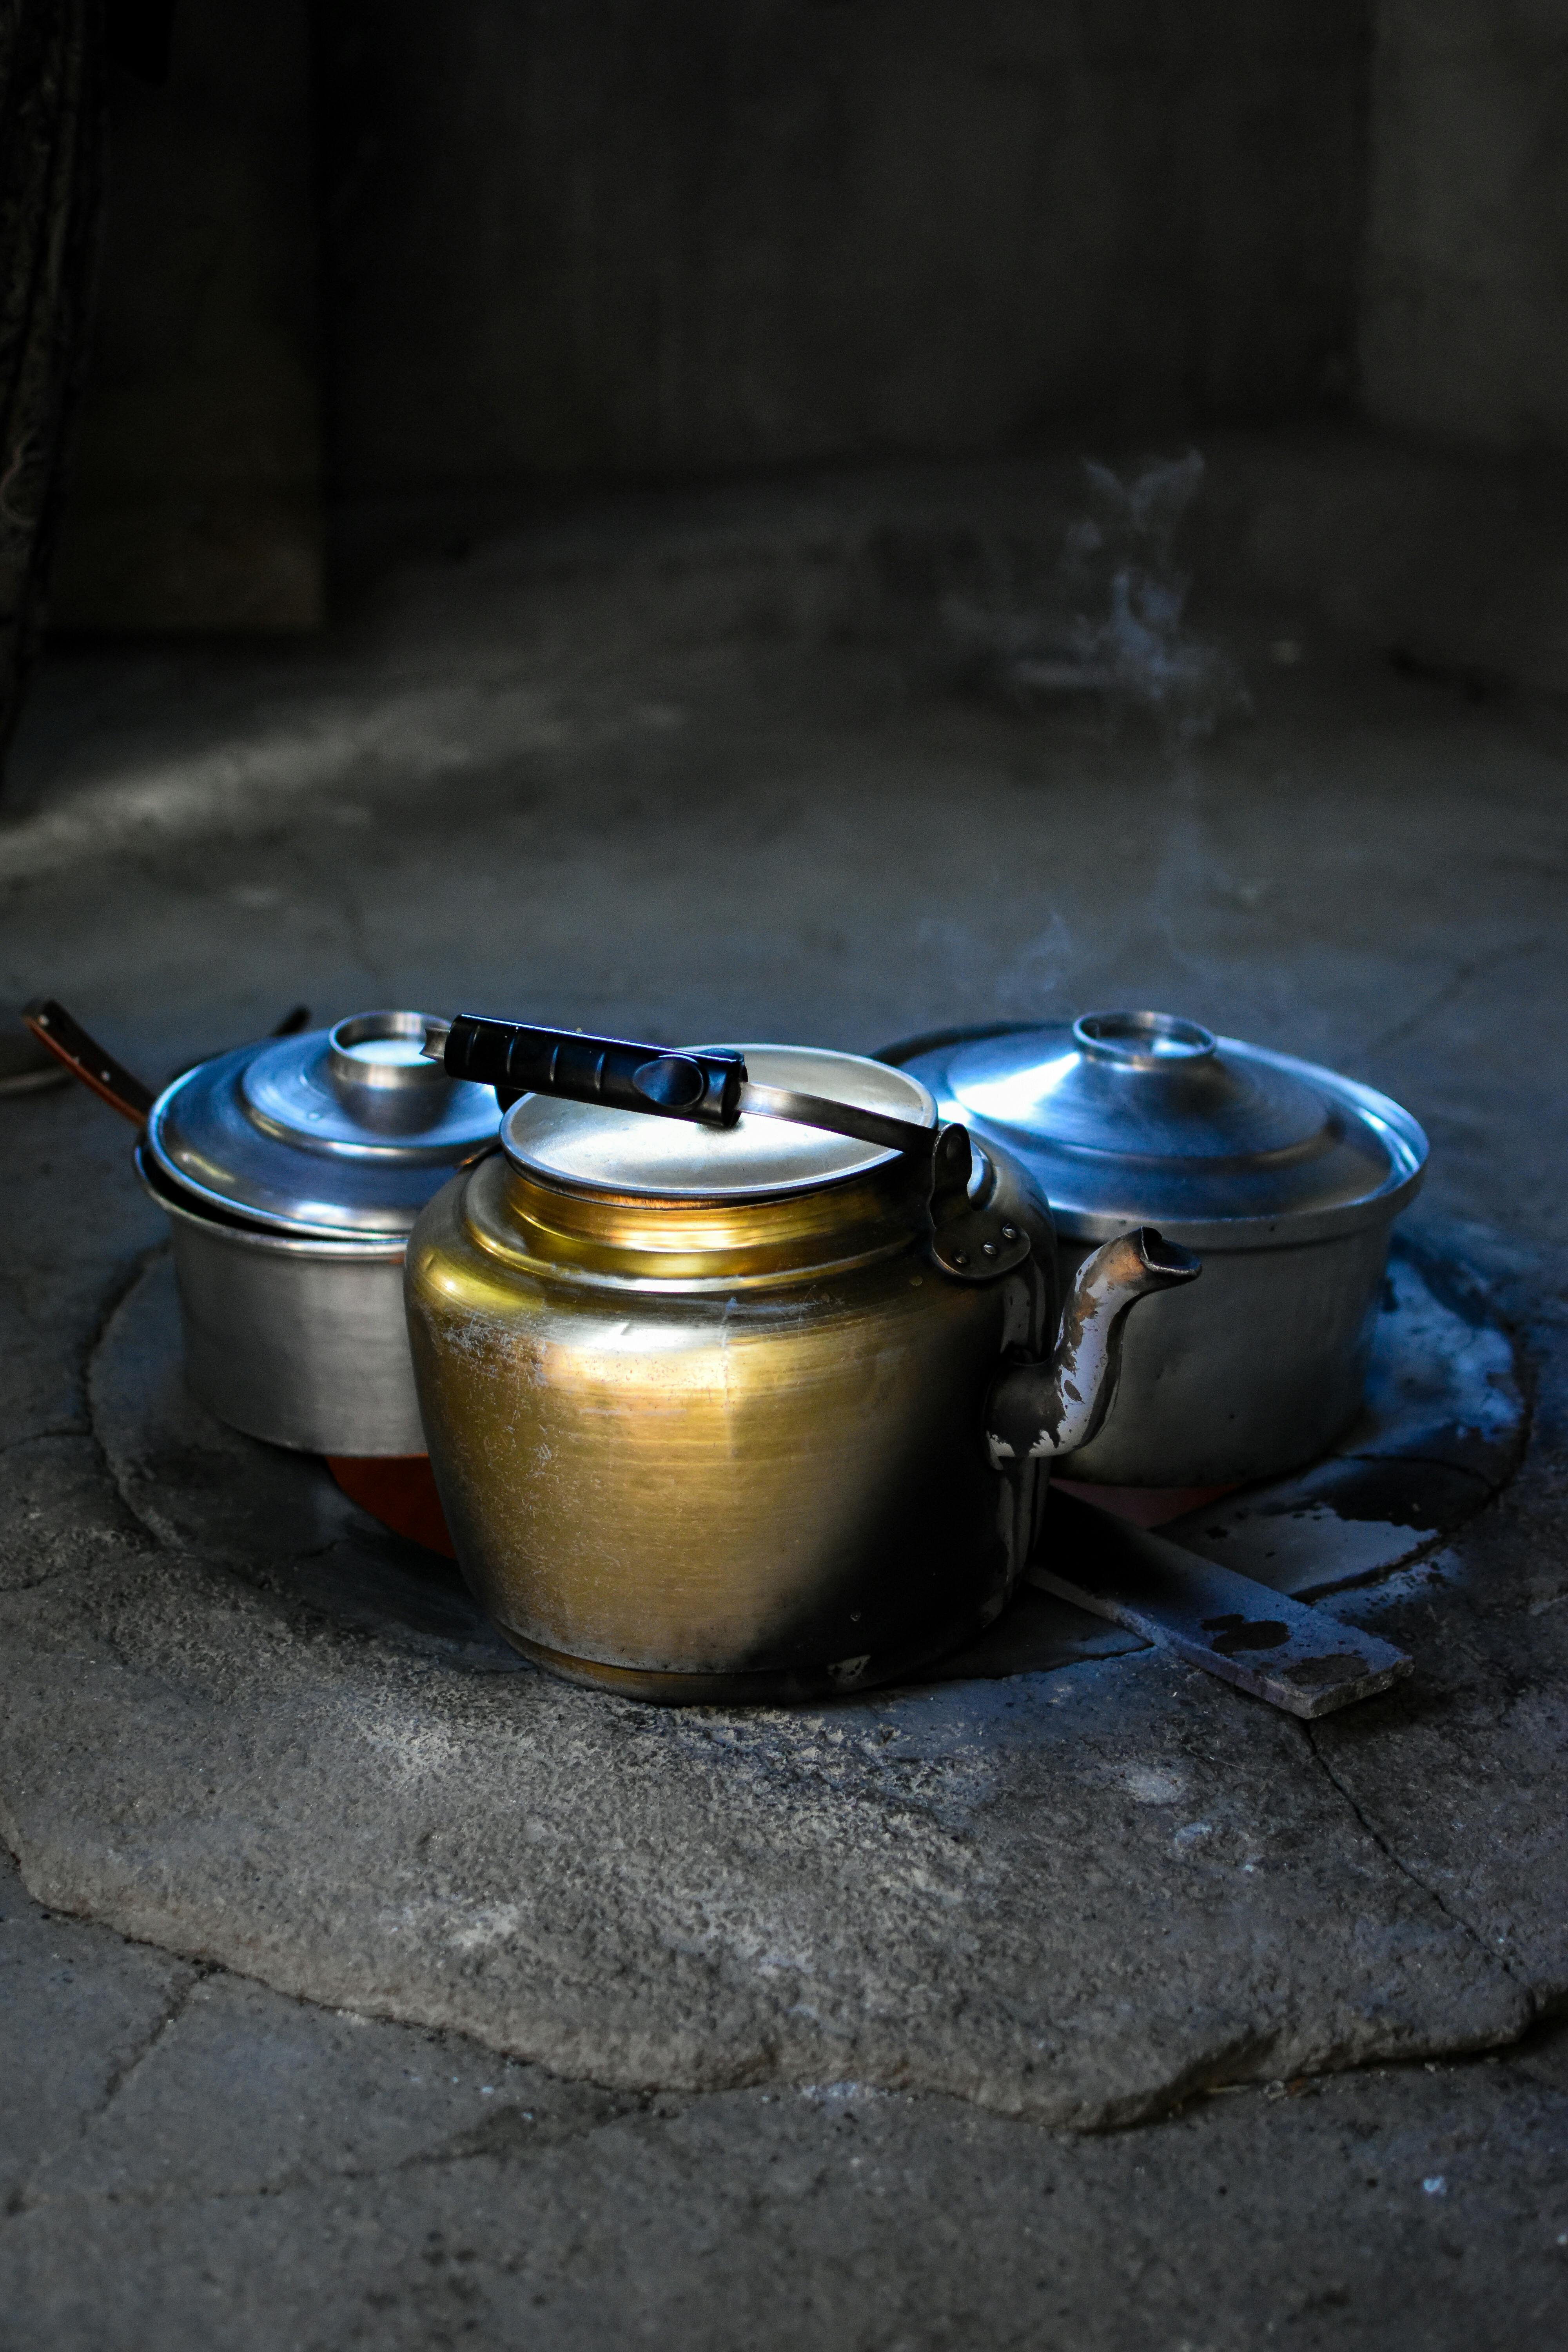 Pots and a kettle | Source: Pexels